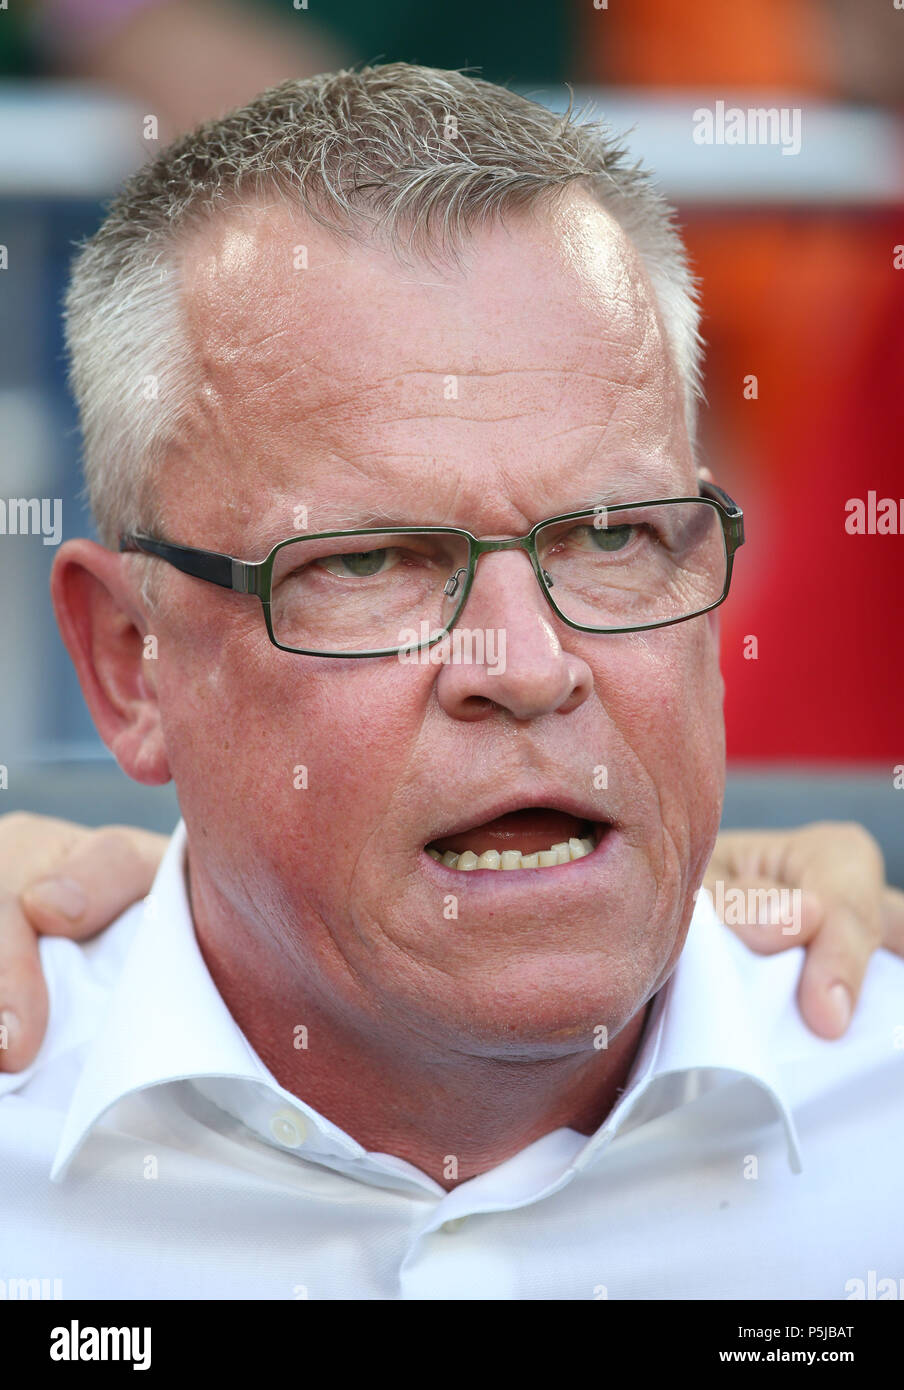 Yekaterinburg, Russia. 27th June, 2018. Head coach Janne Andersson of Sweden is seen prior to the 2018 FIFA World Cup Group F match between Mexico and Sweden in Yekaterinburg, Russia, June 27, 2018. Credit: Li Ming/Xinhua/Alamy Live News Stock Photo